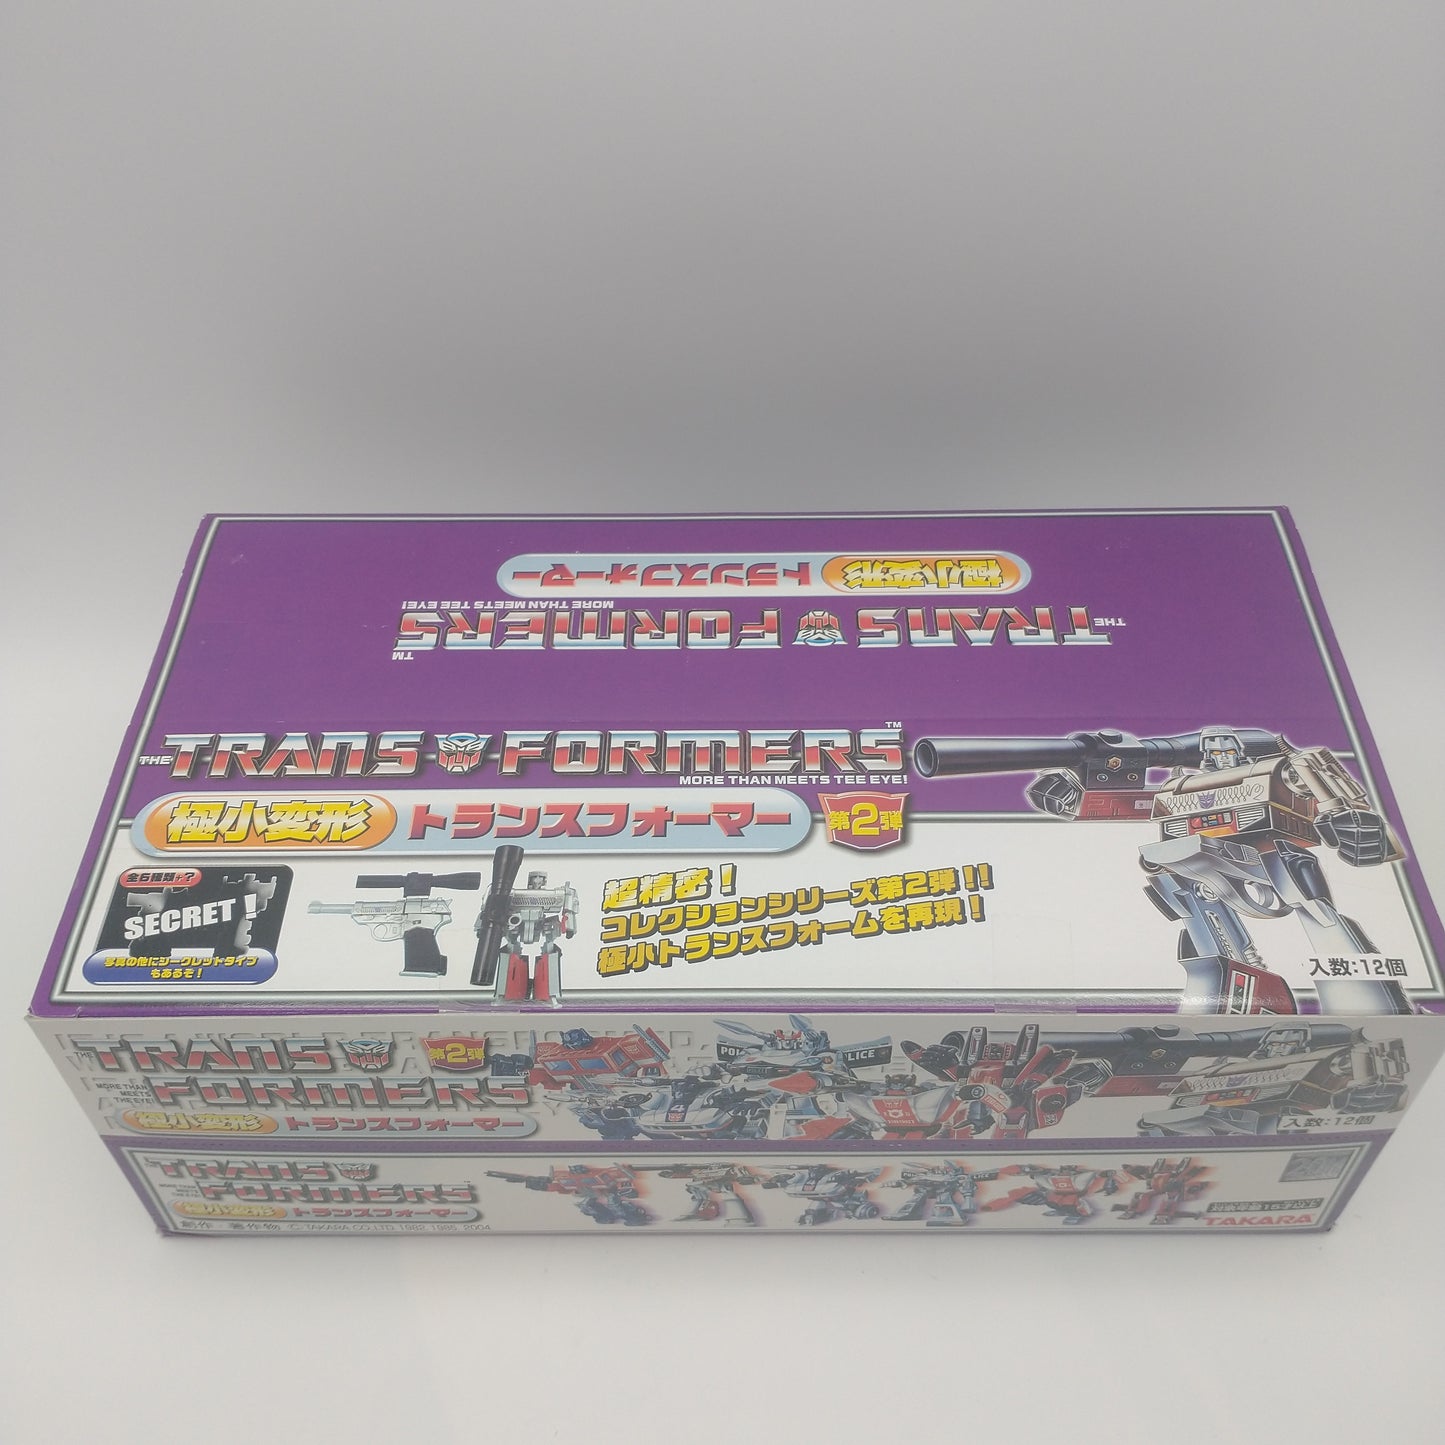 Worlds Smallest Transformers Figures Sealed Shipping/Display Box Takara 2004